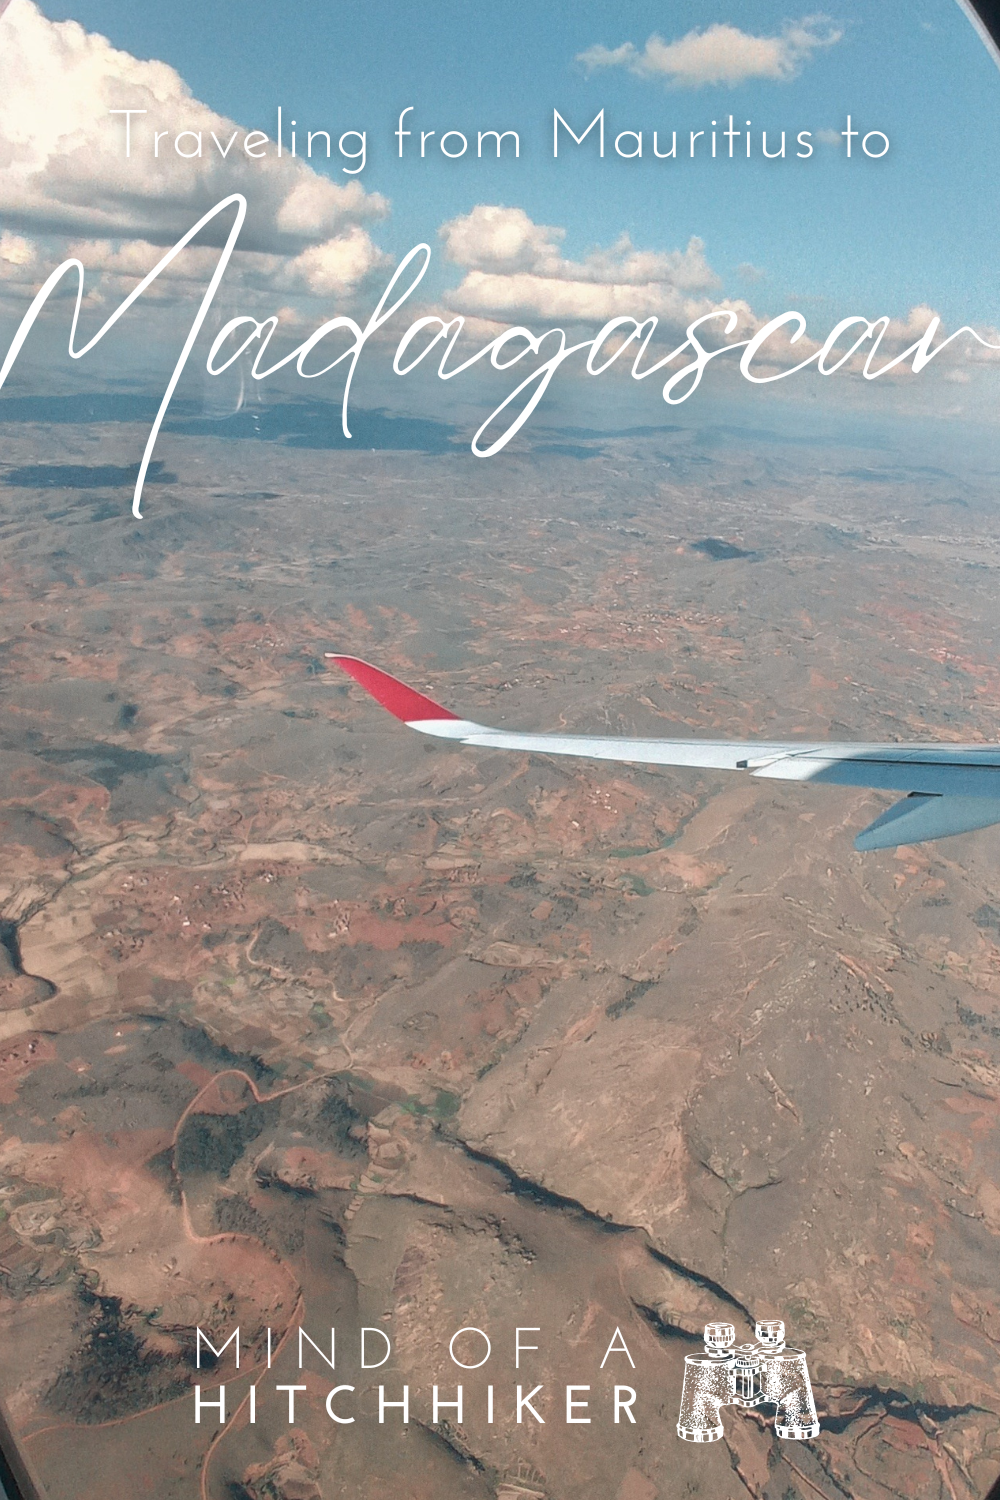 flying air mauritius from mauritius to madagascar